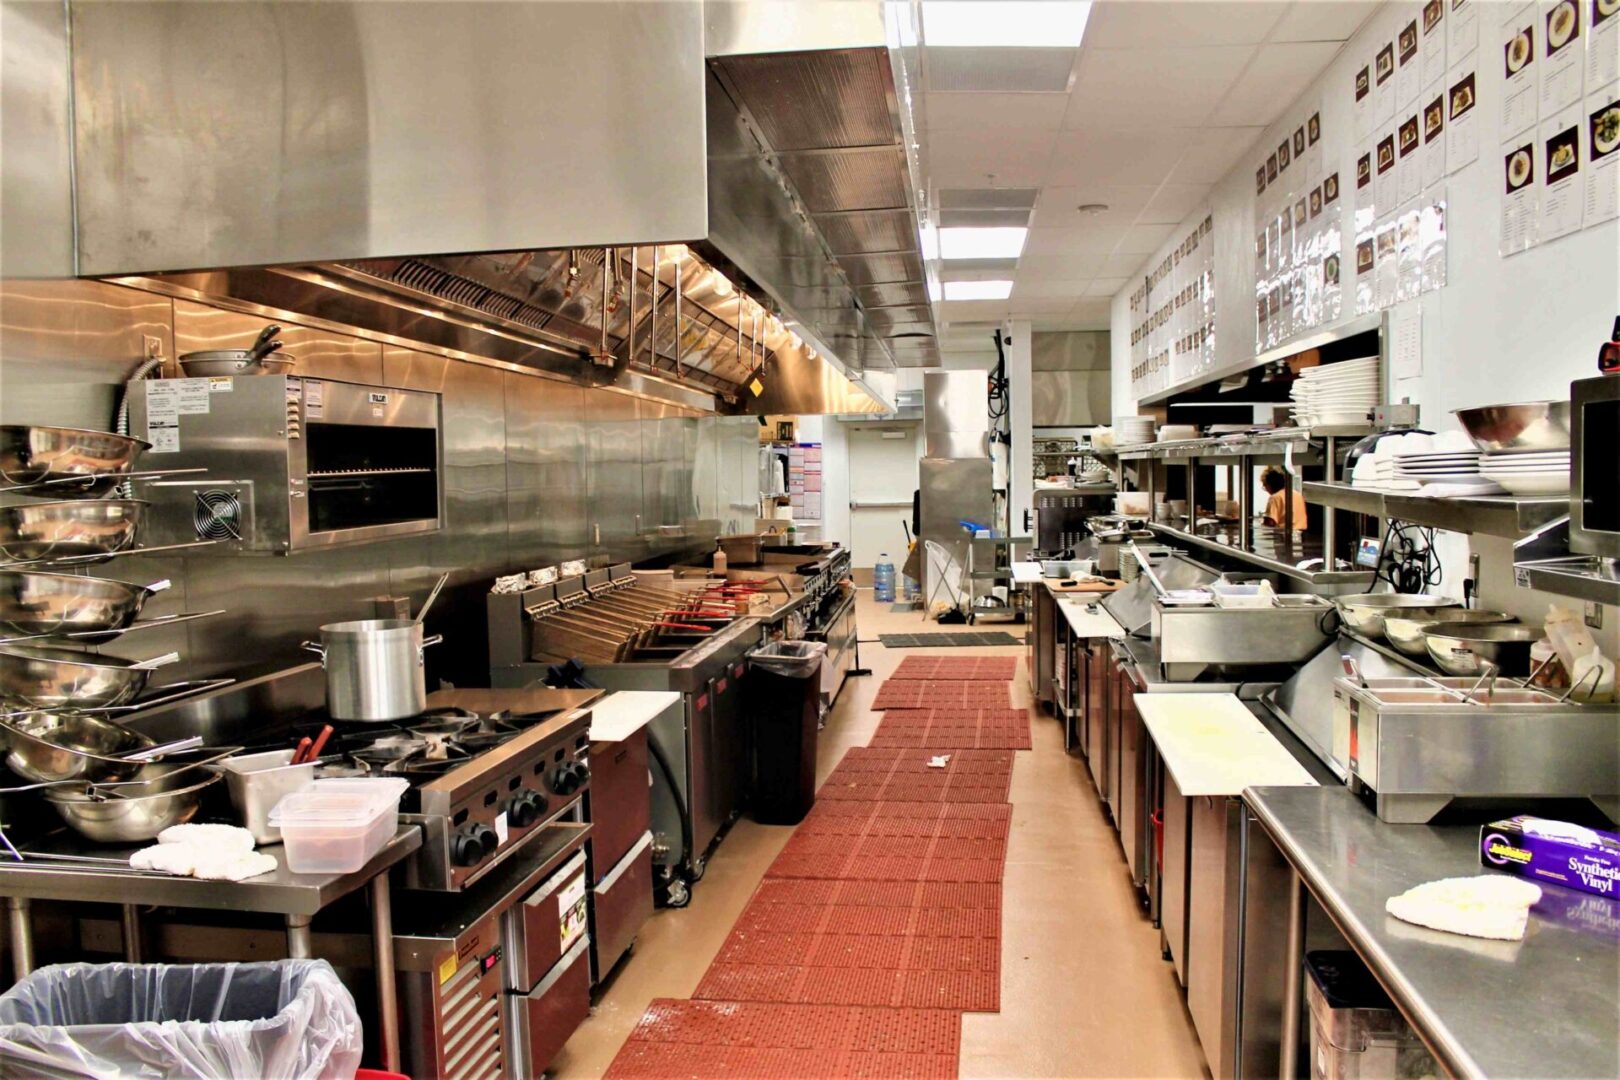 Inside view of a kitchen of a restaurant